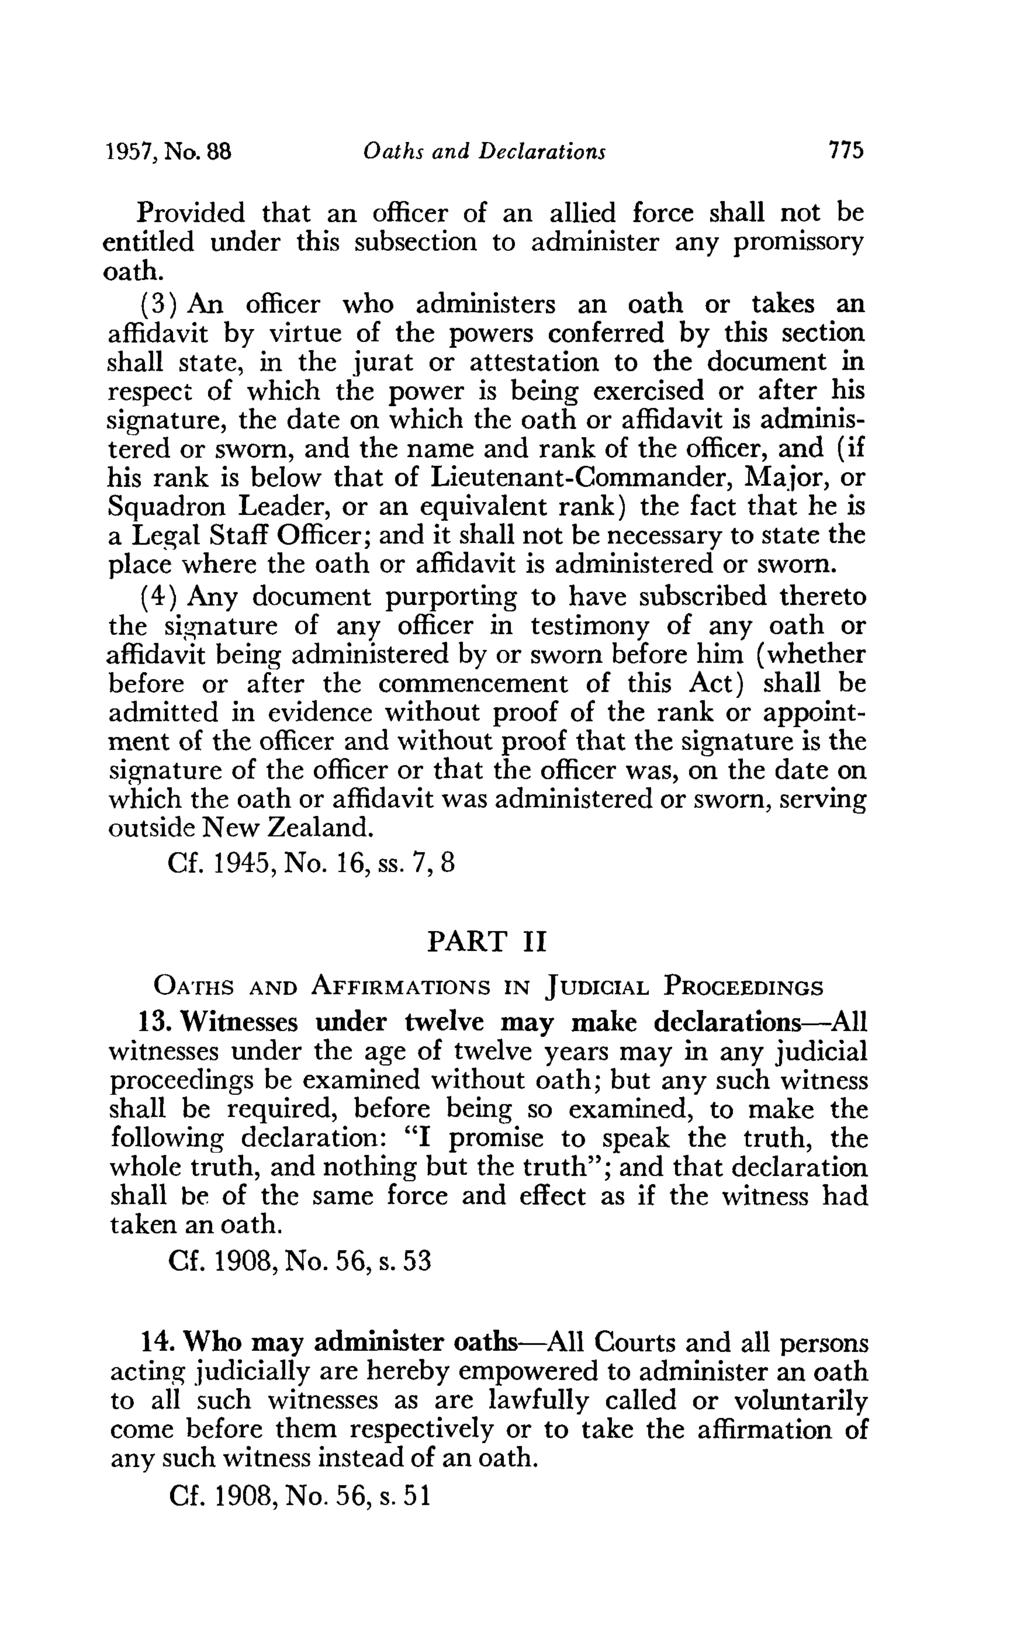 1957, No. 88 Oaths and Declarations 775 Provided that an officer of an allied force shall not be entitled under this subsection to administer any promissory oath.